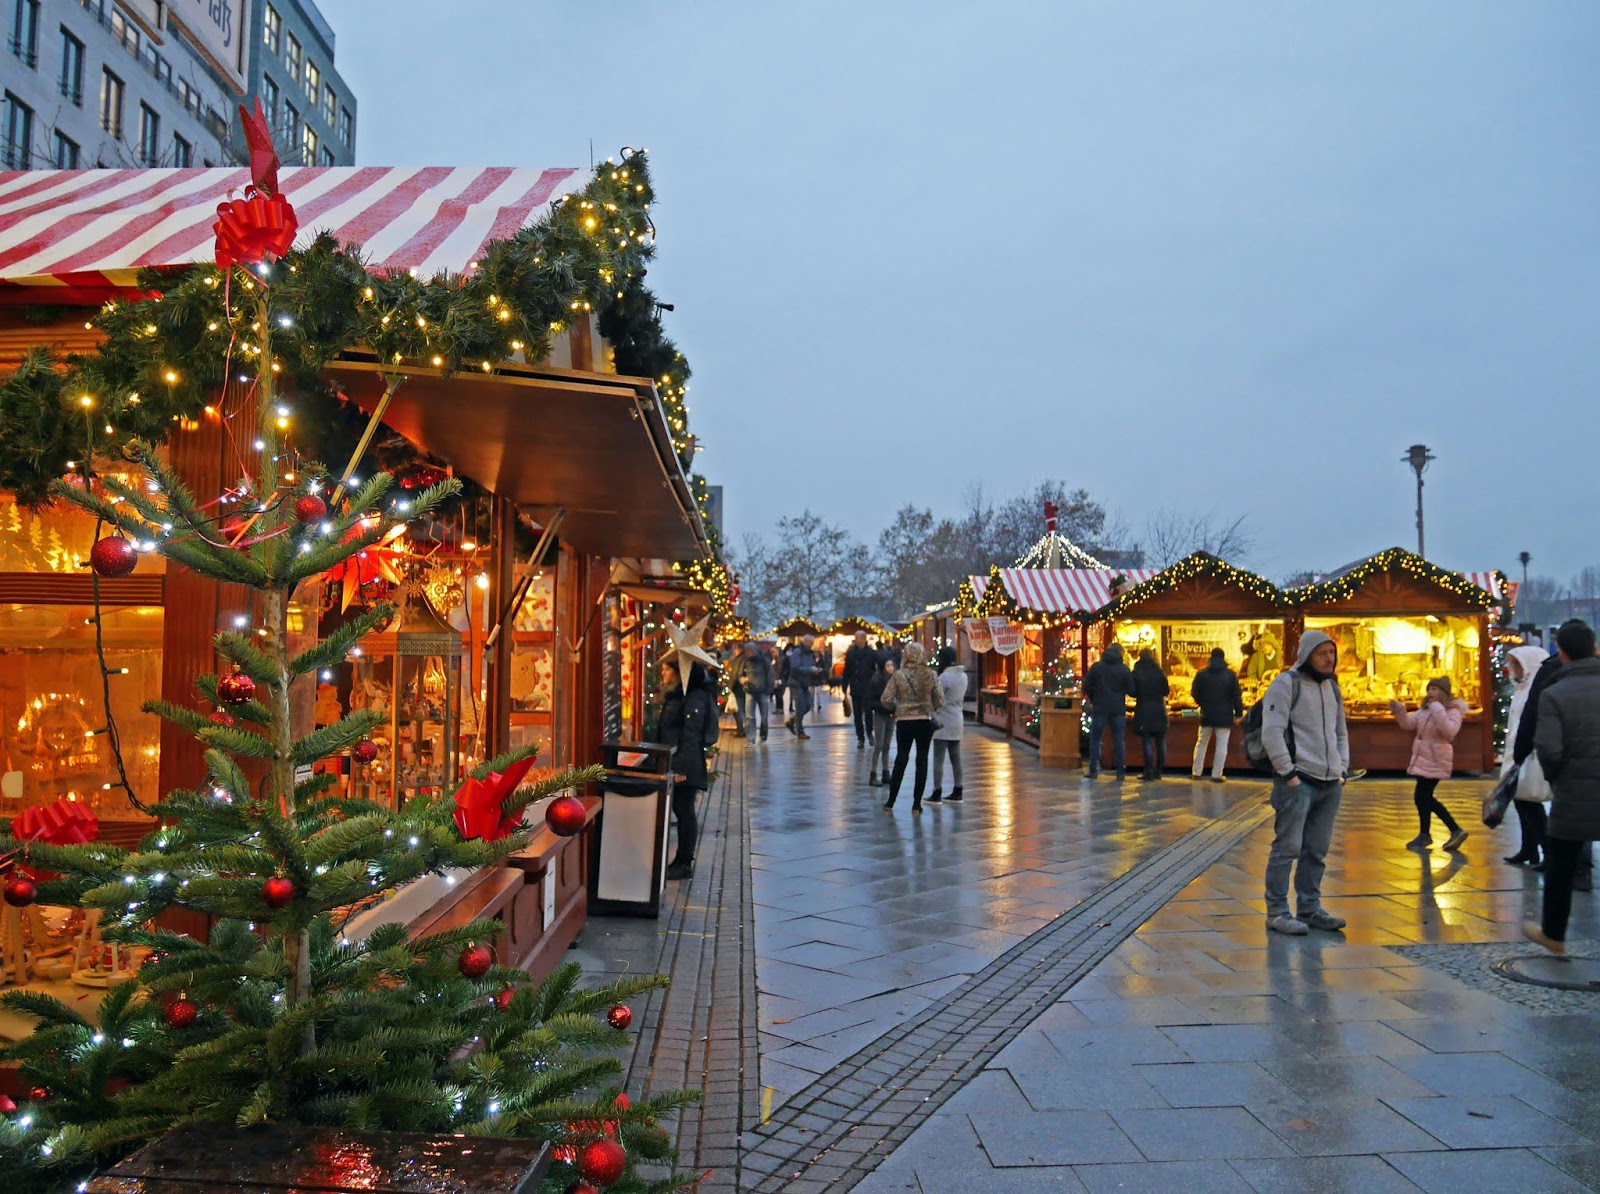 Friedrichstrasse Station Christmas Market during the late afternoon, Berlin